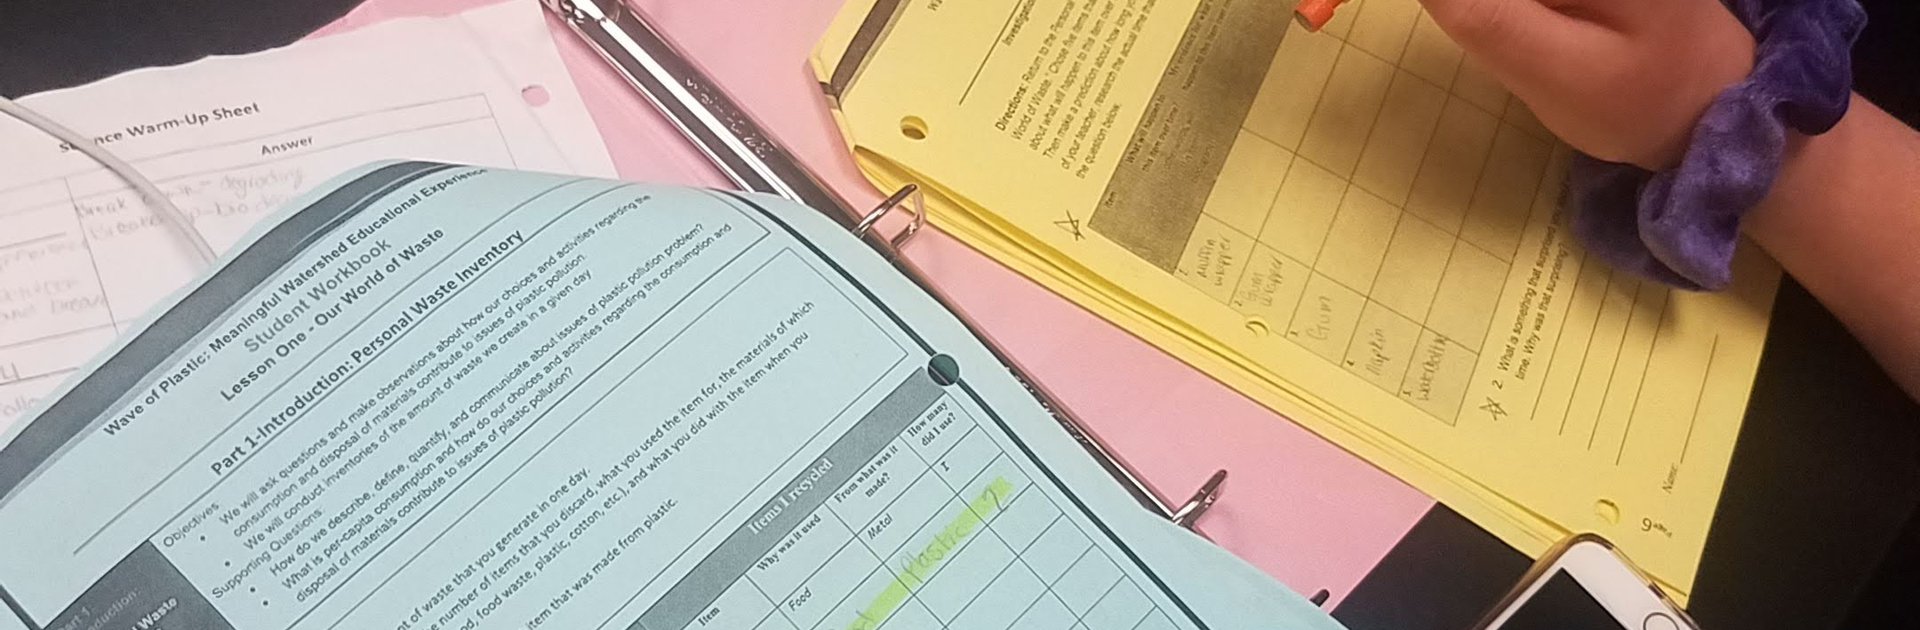 close up image of a school binder and work